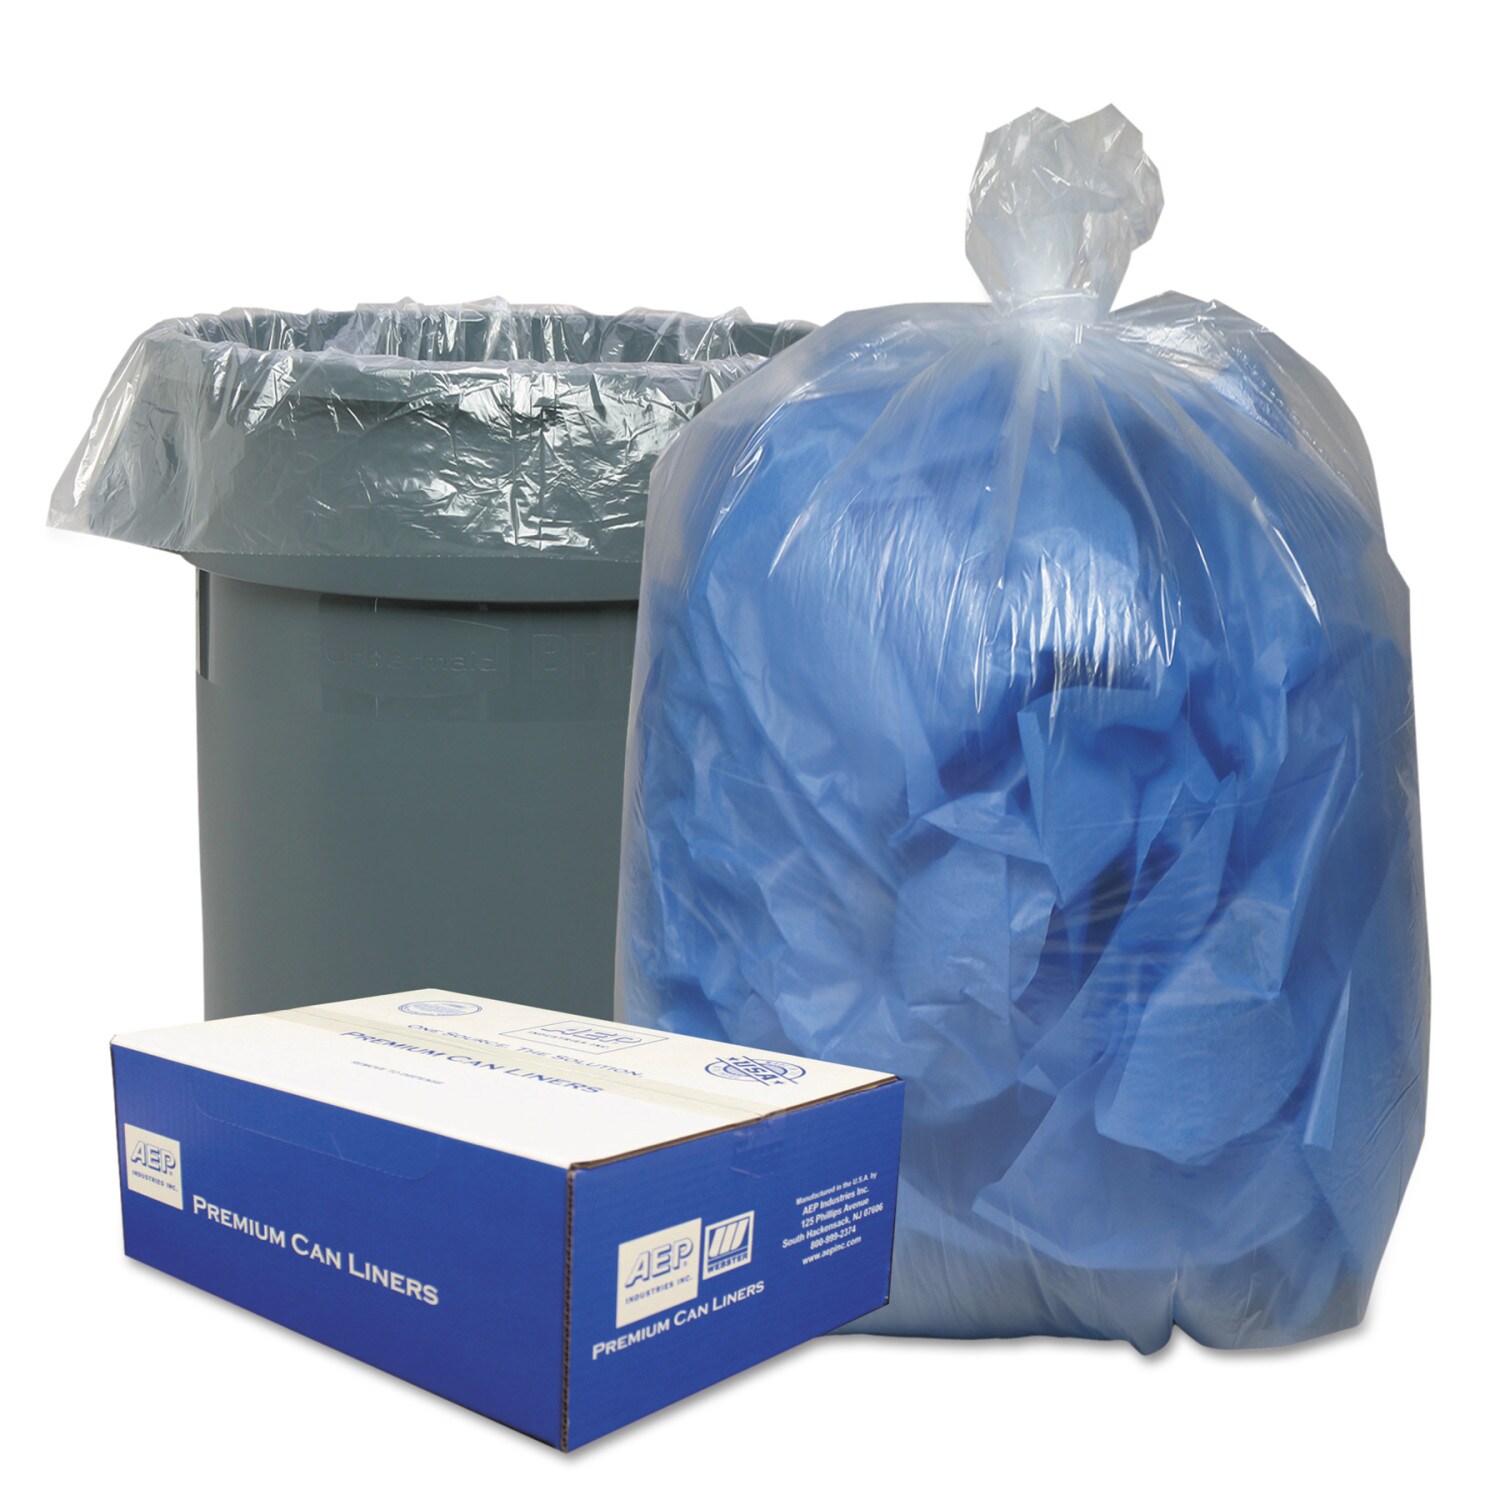 Clear Recycling Bags - Dependable Plastic